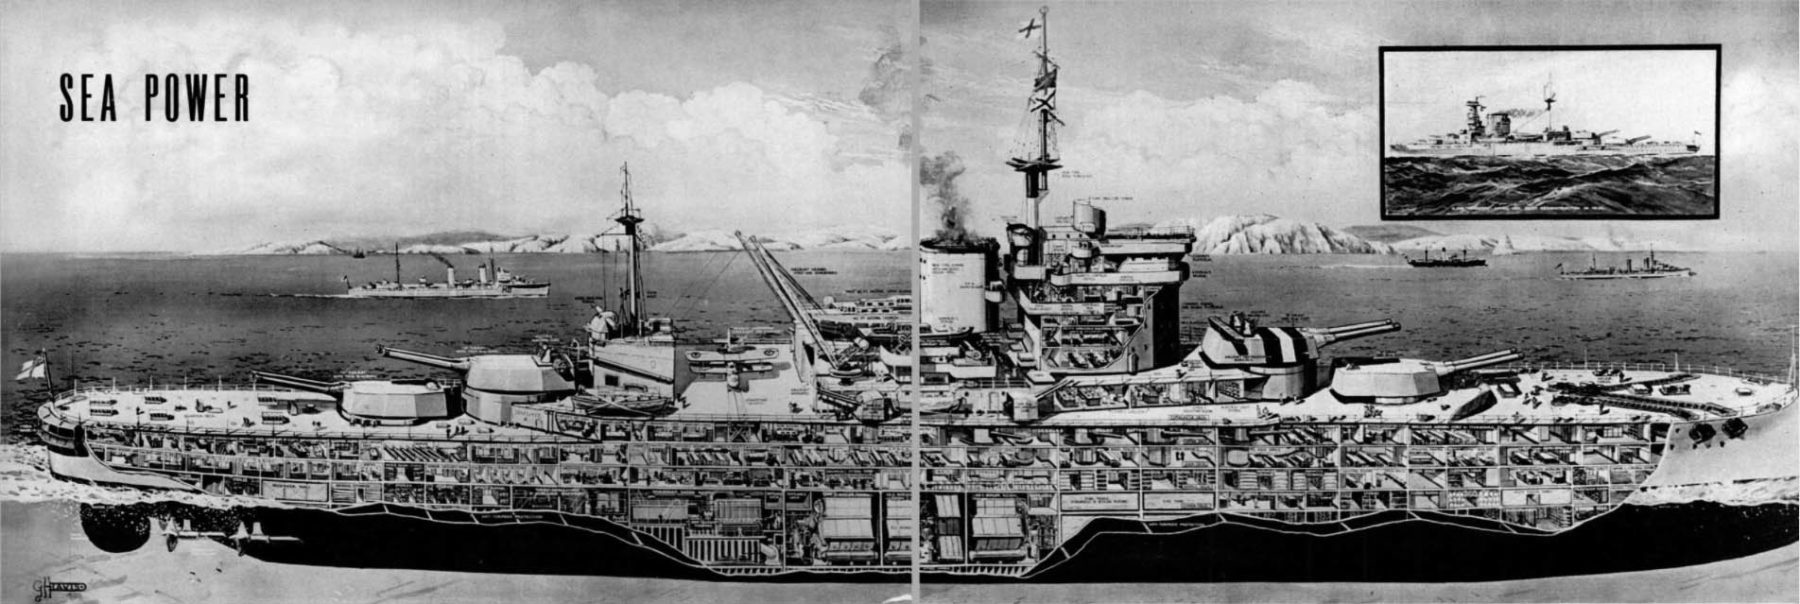 1938 UK magazine article about sea power showing a cutaway of the Warspite